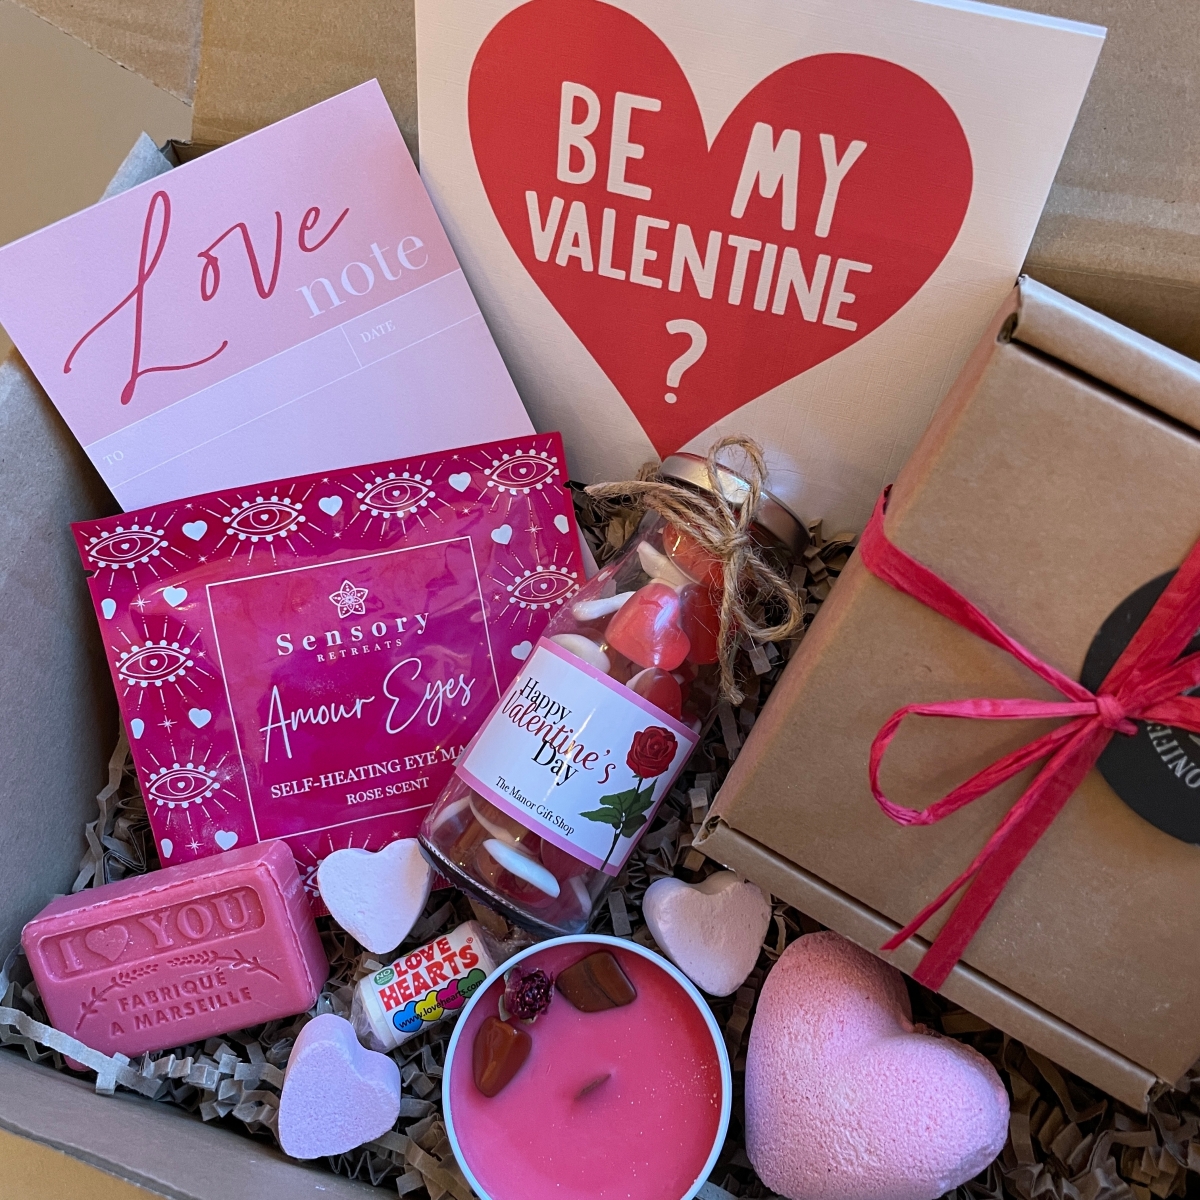 Last Minute Valentine's Day Gifts to Order Online | Dallas Socials